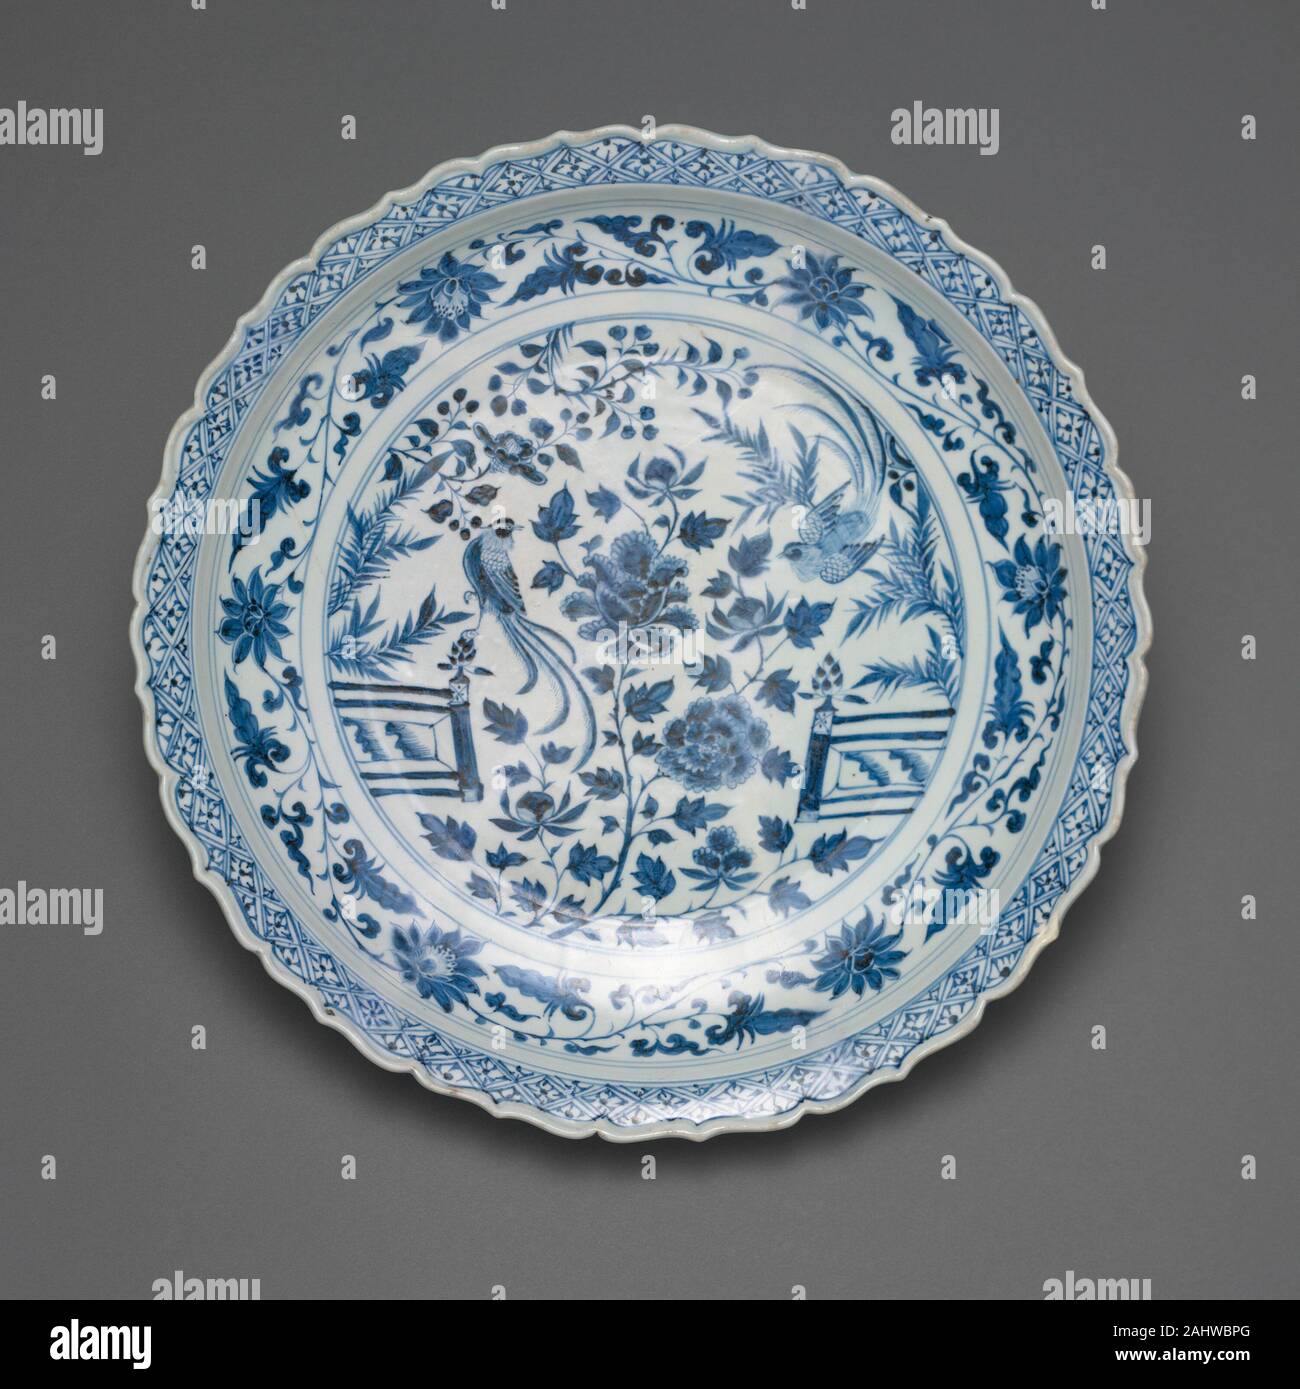 Shallow Dish with Long-Tailed Birds in a Garden of Stylized Peonies and Fronds, Encircled by a Scrolling Wreath of Camellia and Lotus Blossoms. 1300–1350. China. Porcelain painted in underglaze blue Stock Photo